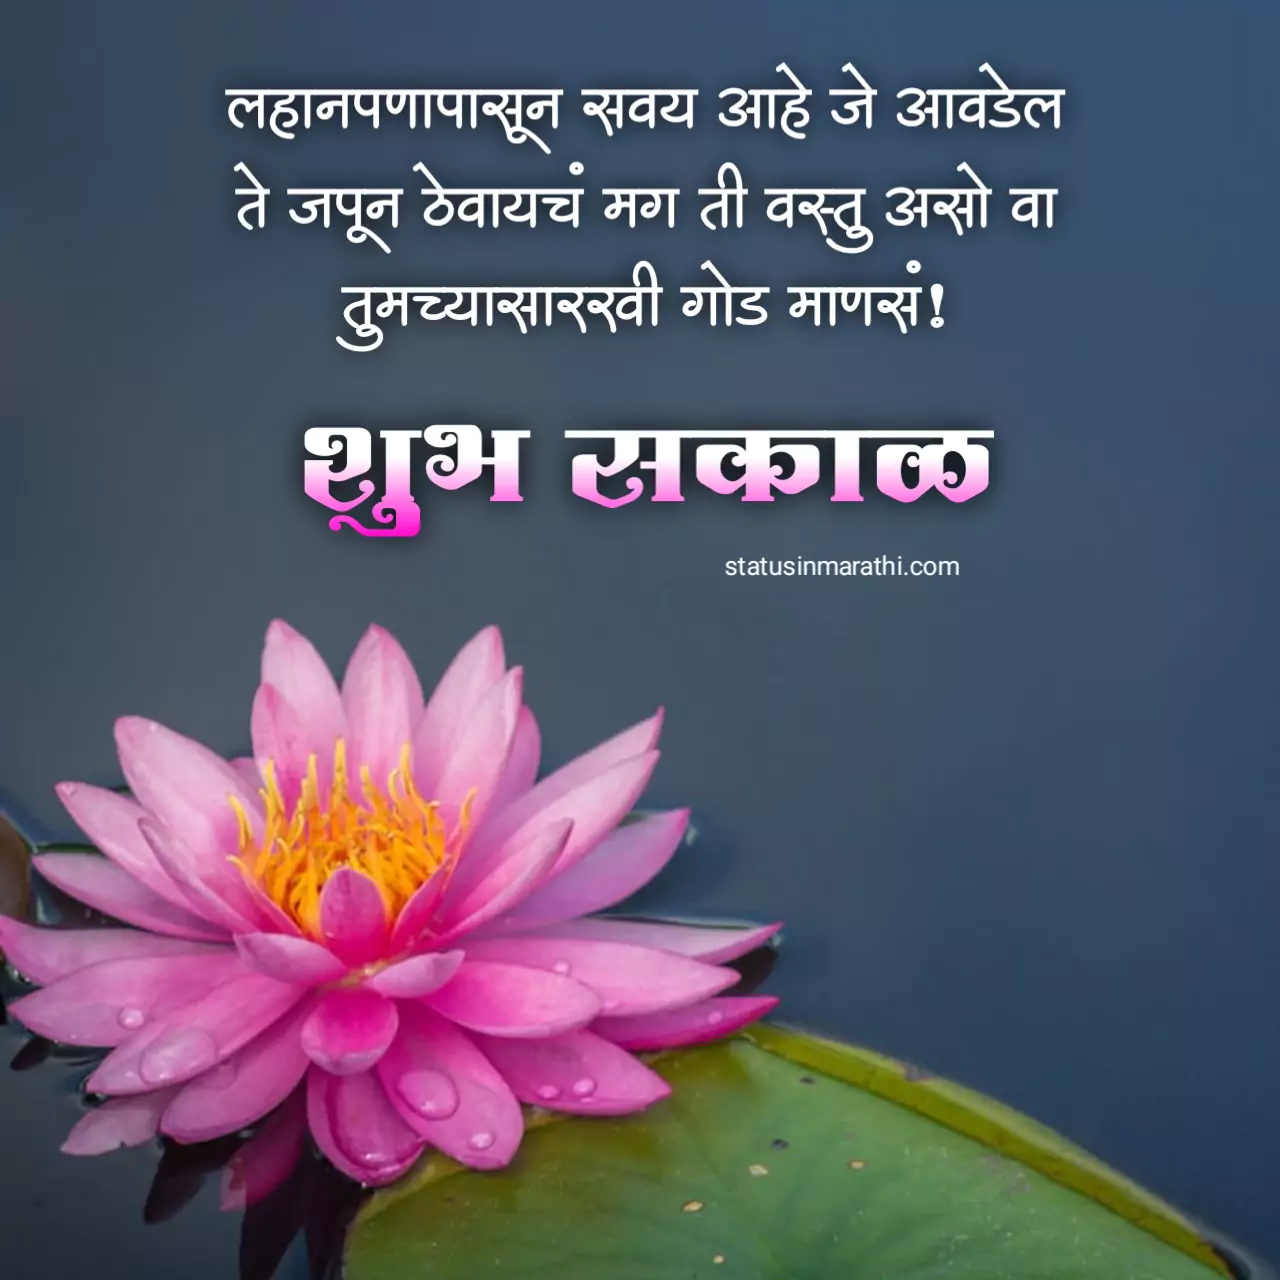 Good morning messages in marathi